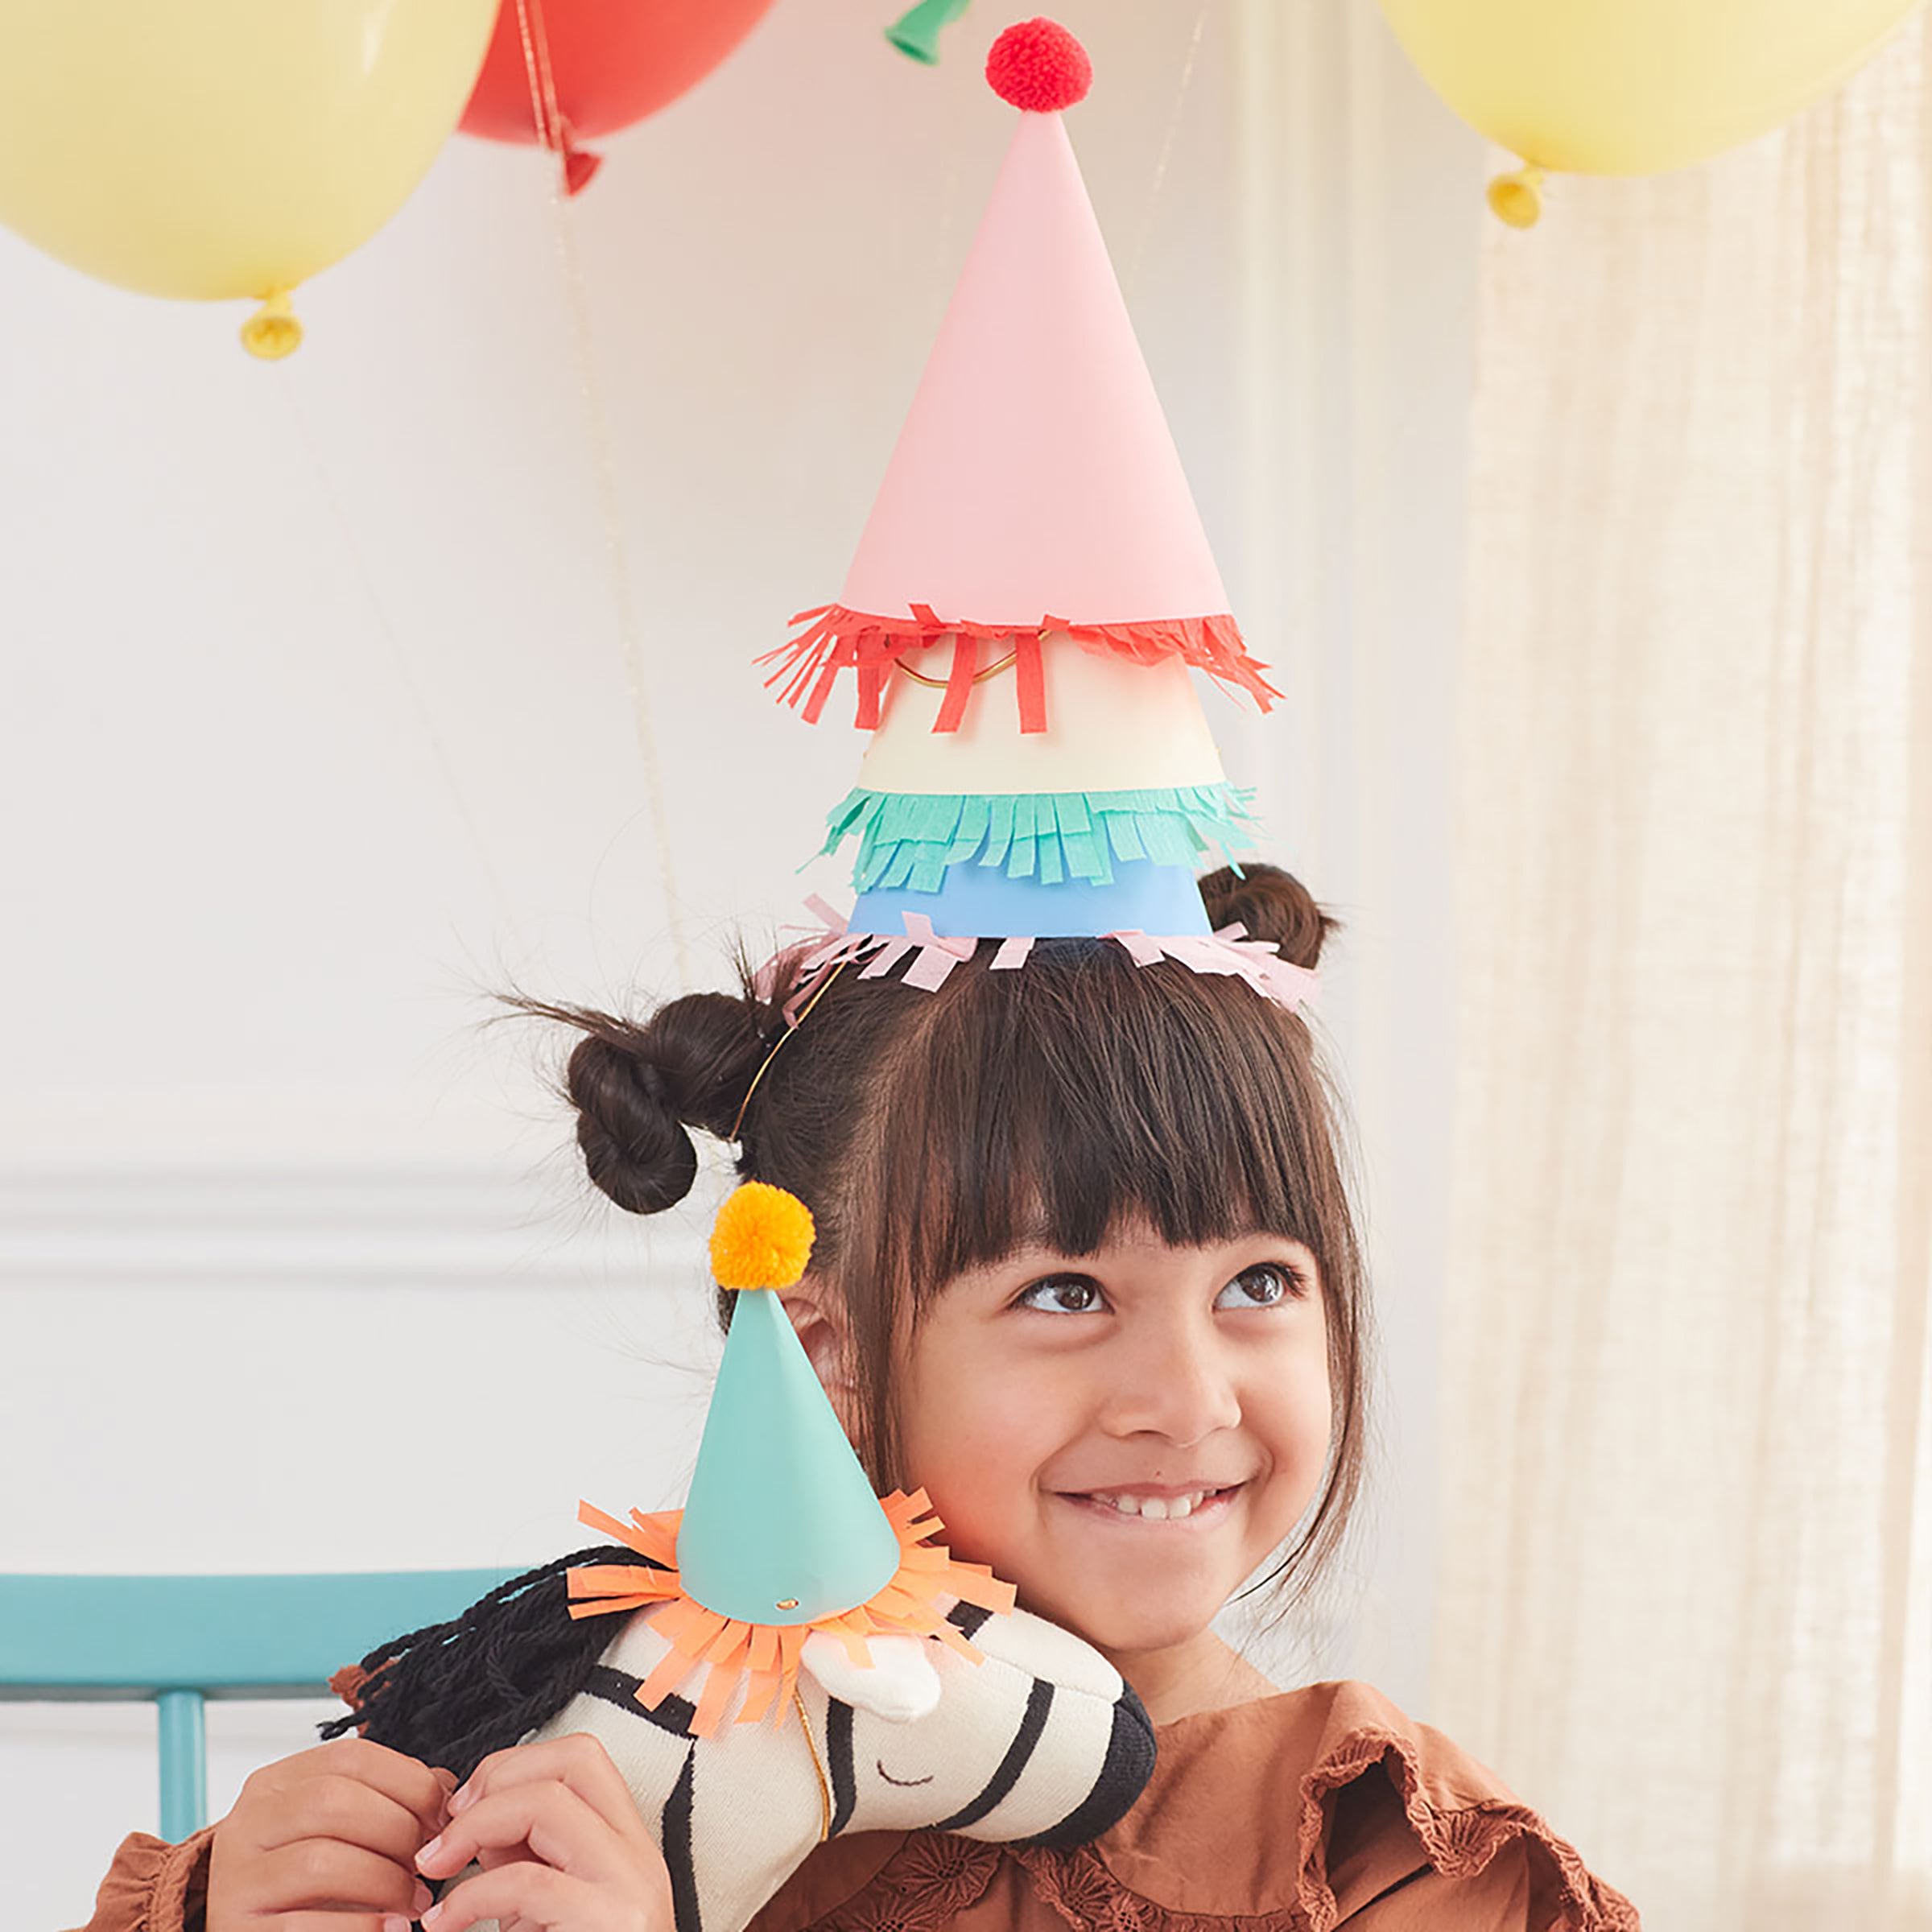 Our paper hats feature fringing, pompoms and bright colors.